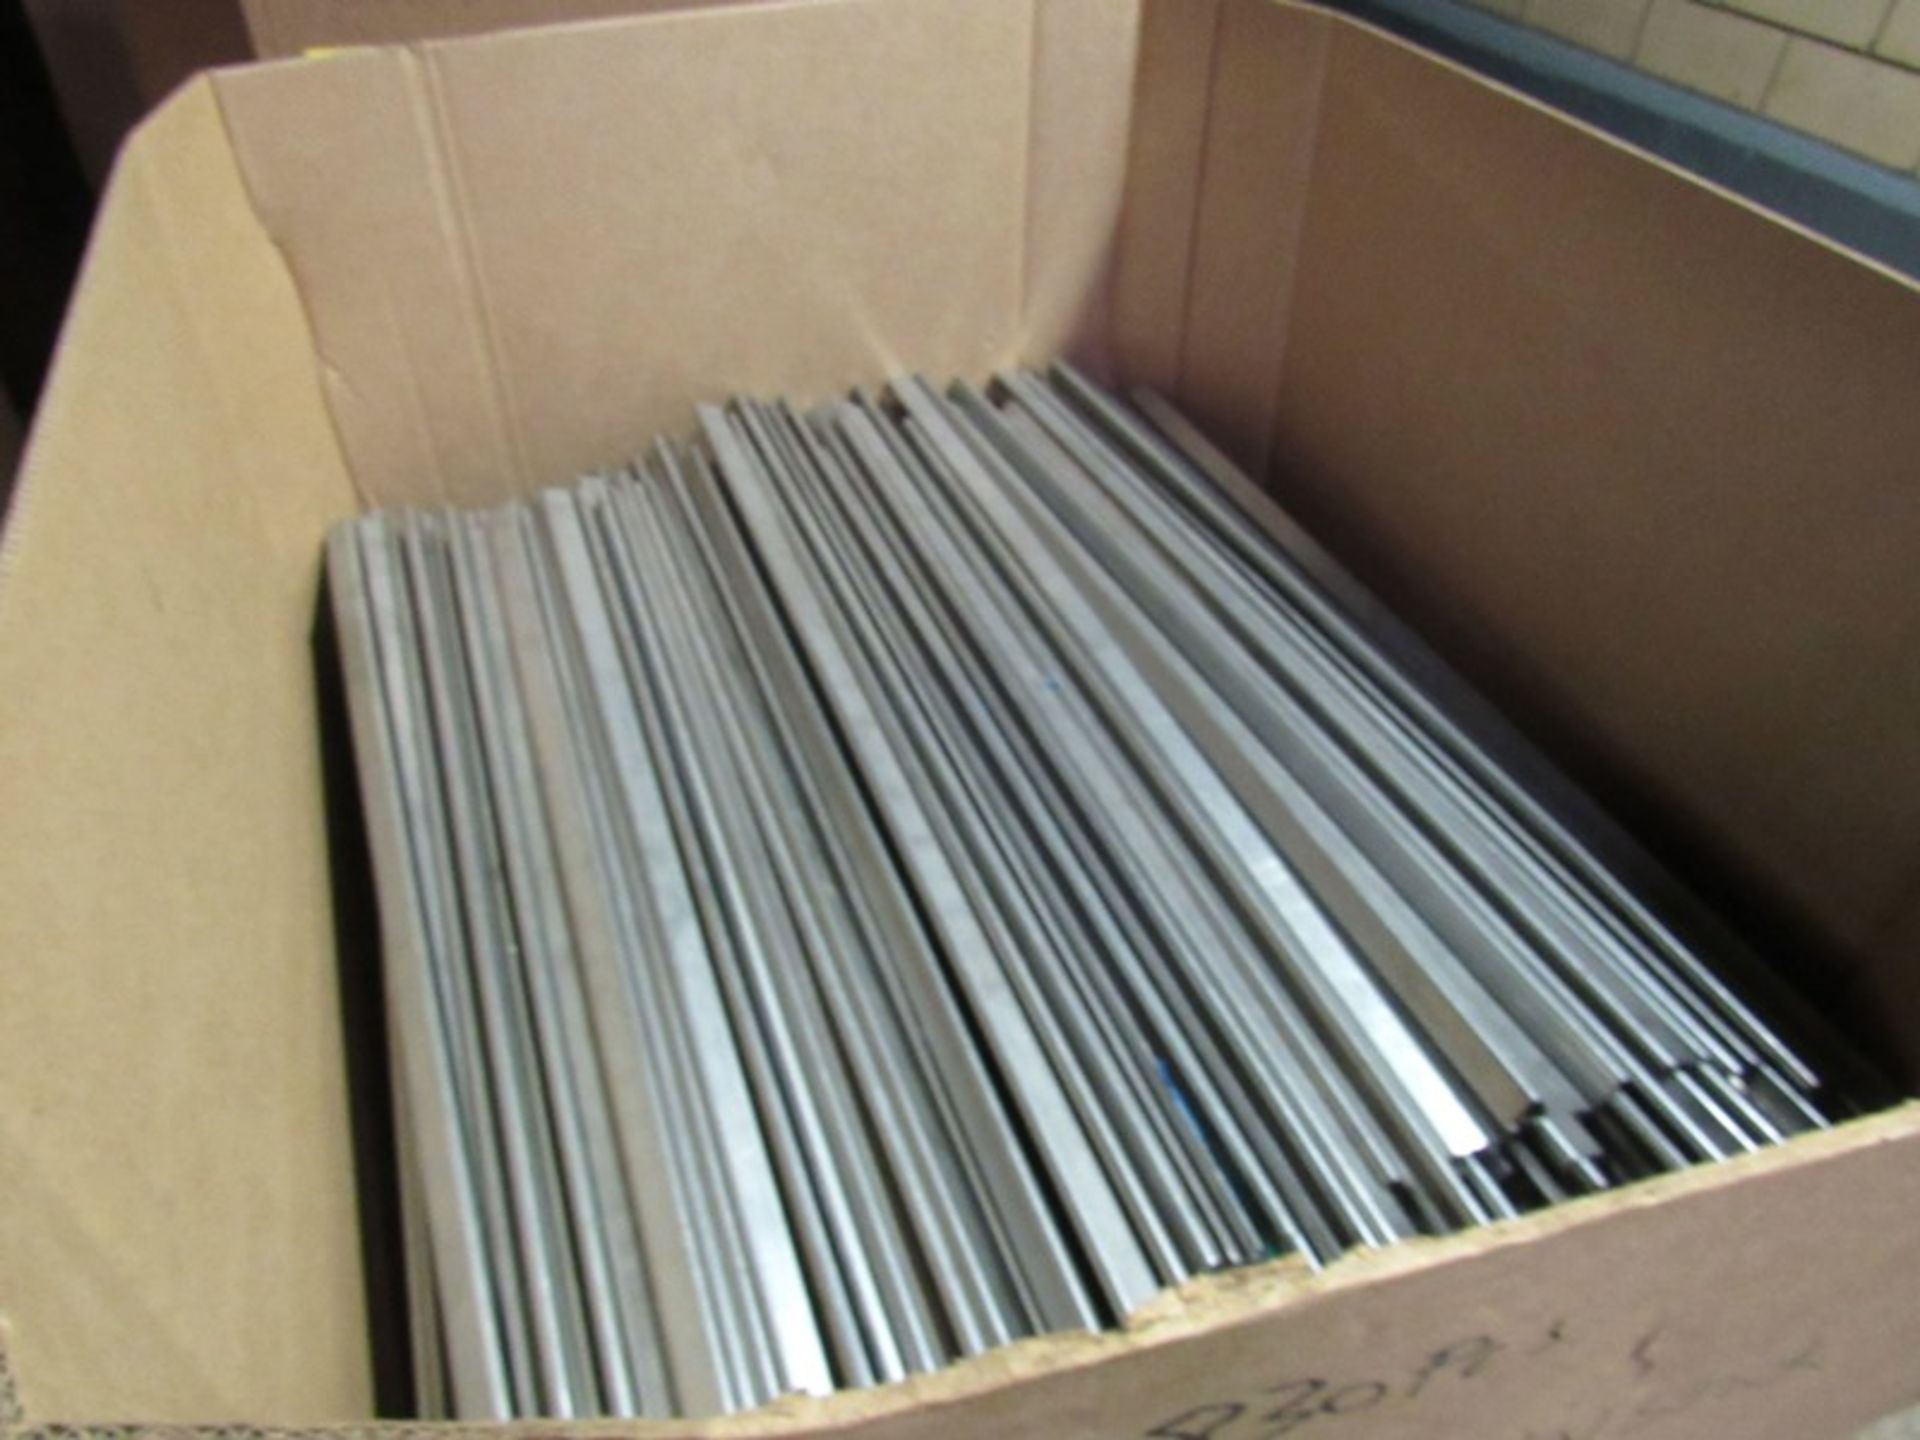 Lot of approx. (830) 39" Stainless Steel Smoke Sticks in cardboard combo, 1979 Lbs approx. weight (